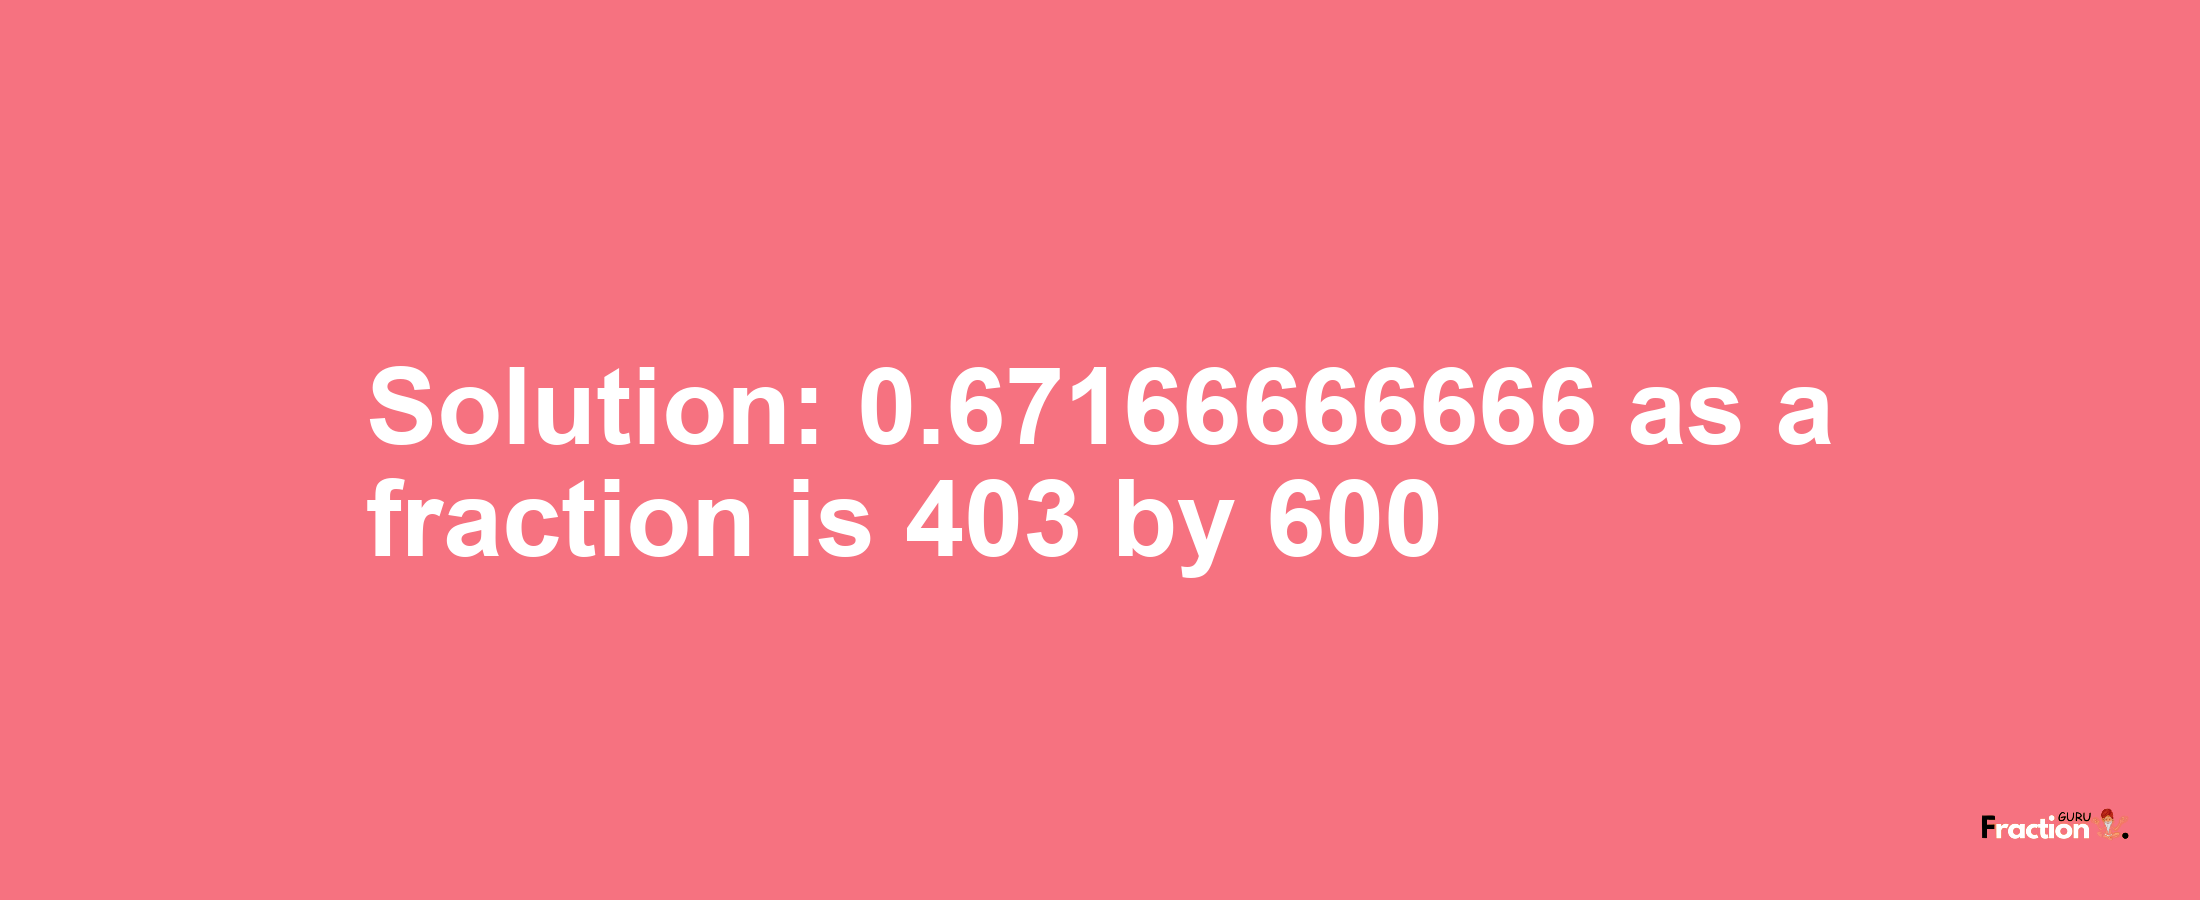 Solution:0.67166666666 as a fraction is 403/600